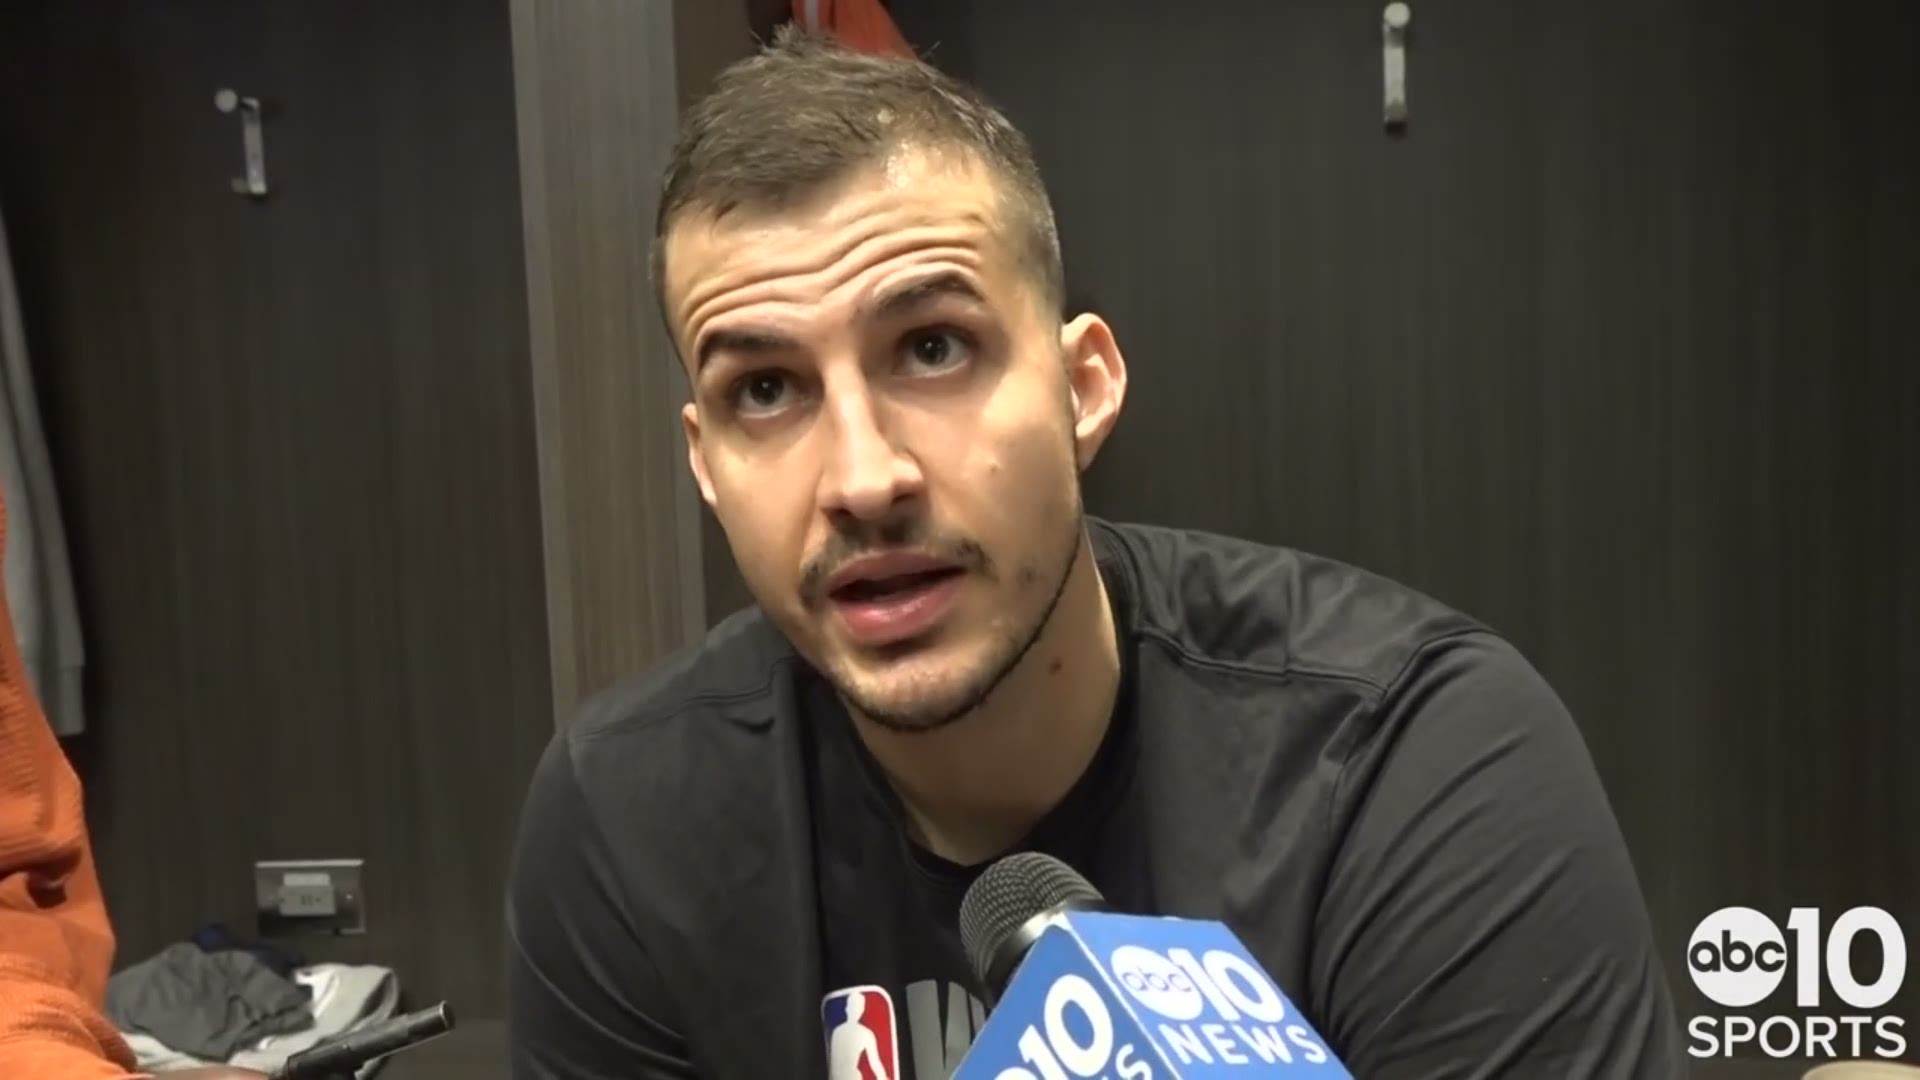 Sacramento Kings F Nemanja Bjelica on Sunday afternoon’s 100-99 win over the Boston Celtics and bouncing back from Friday’s loss in Los Angeles against the Lakers